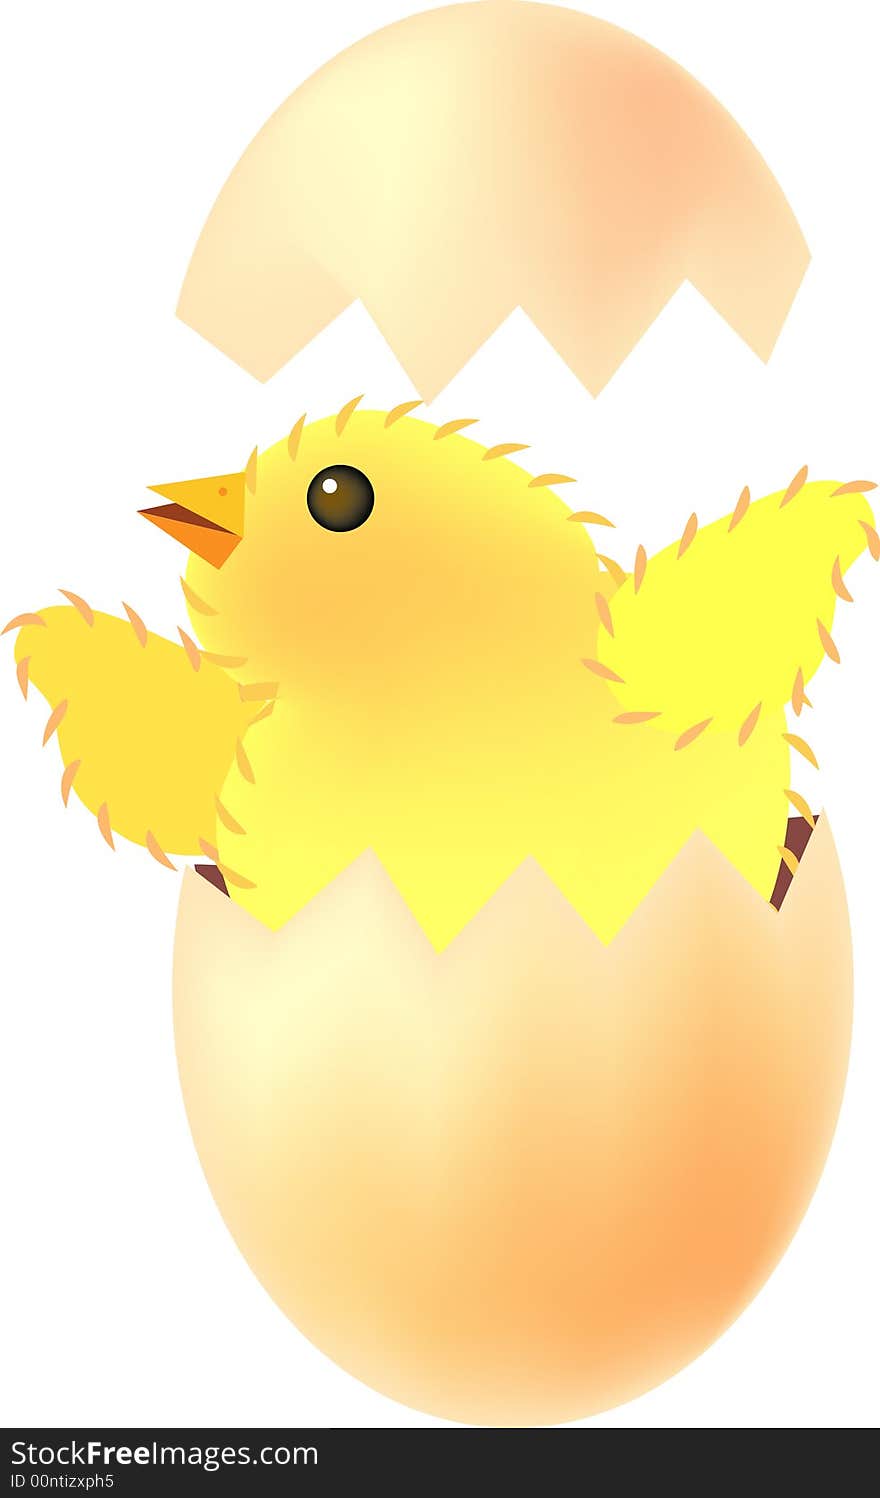 Vector illustration for a chick hatched out from the eggshell